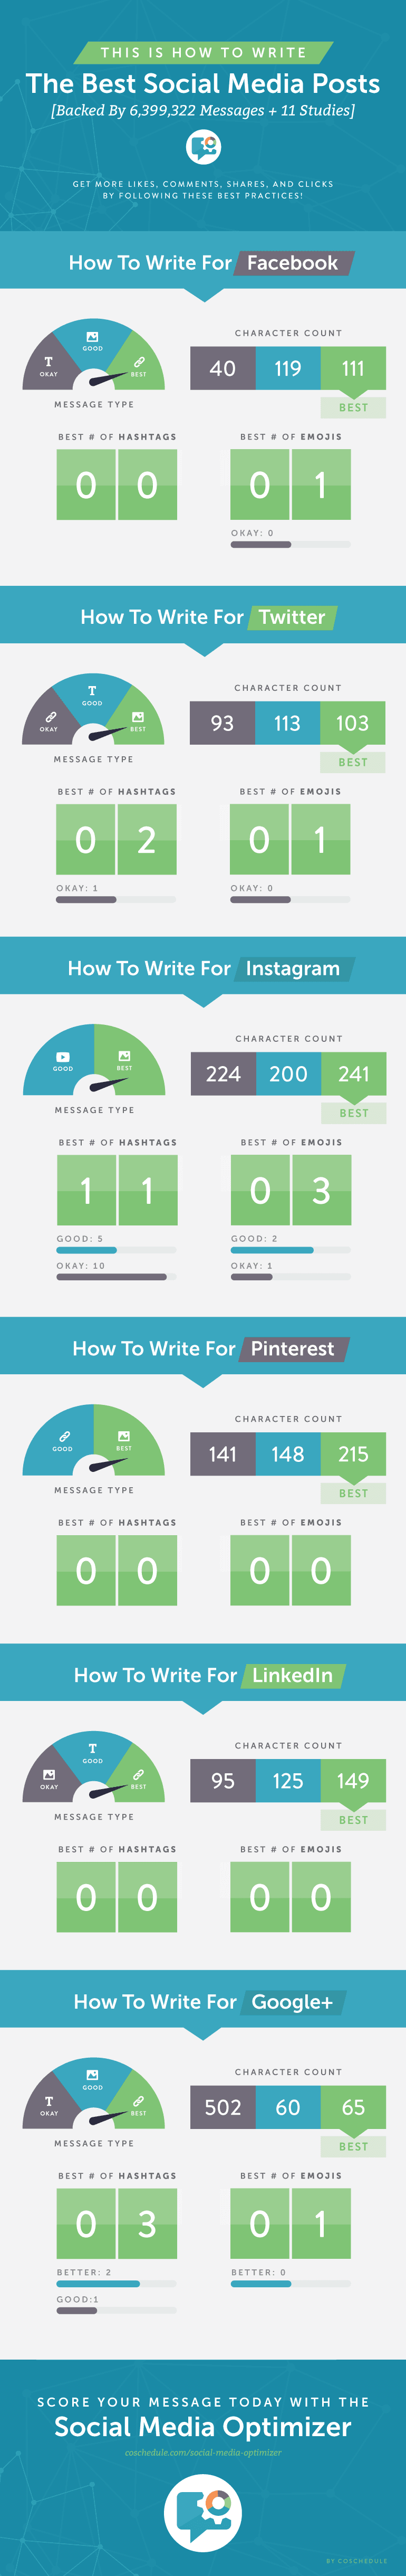 Writing for Social Media Infographic